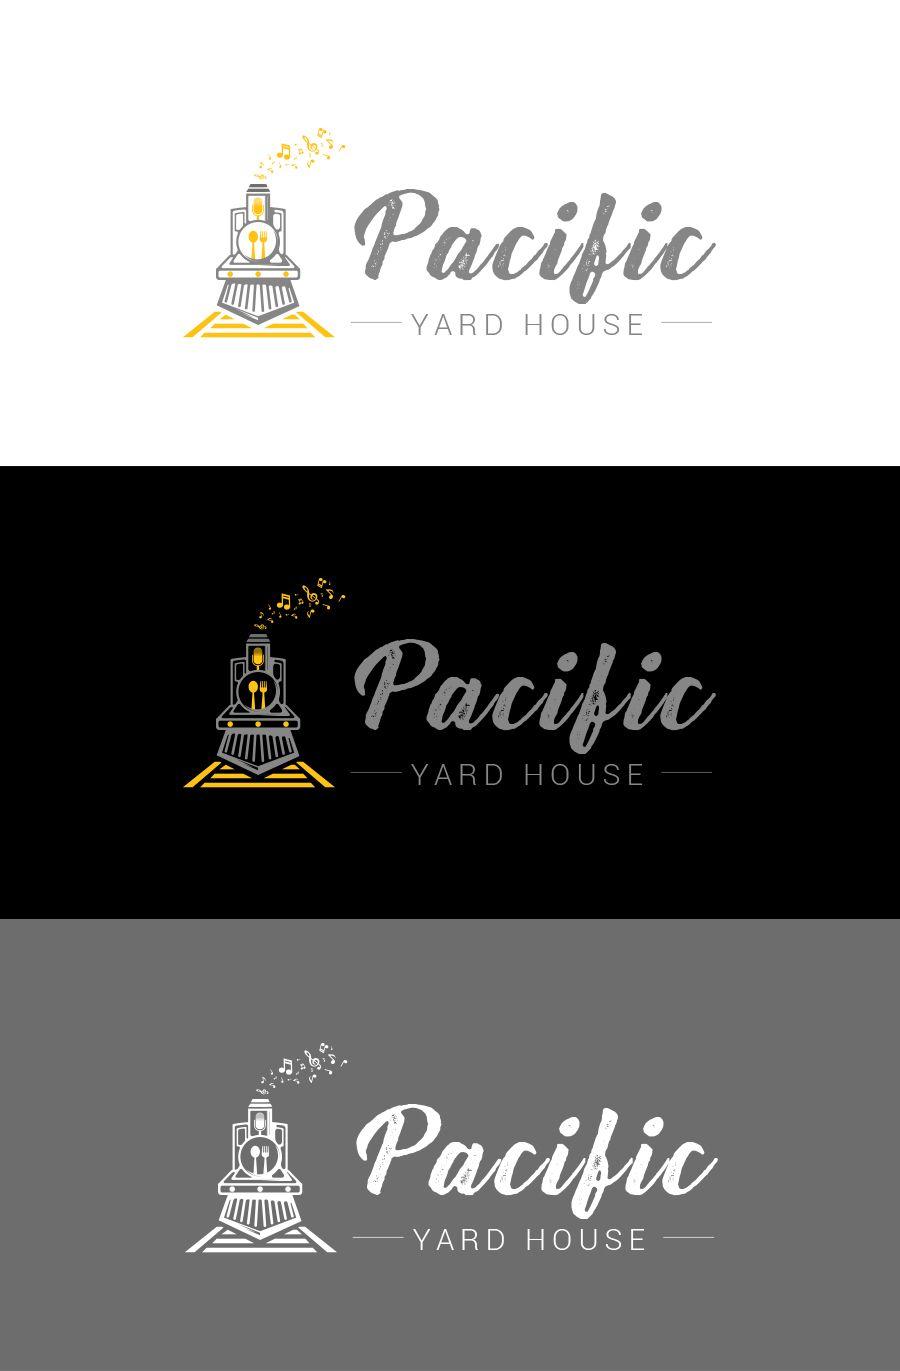 Yard House Logo - Masculine, Personable, Restaurant Logo Design for Pacific Yard House ...